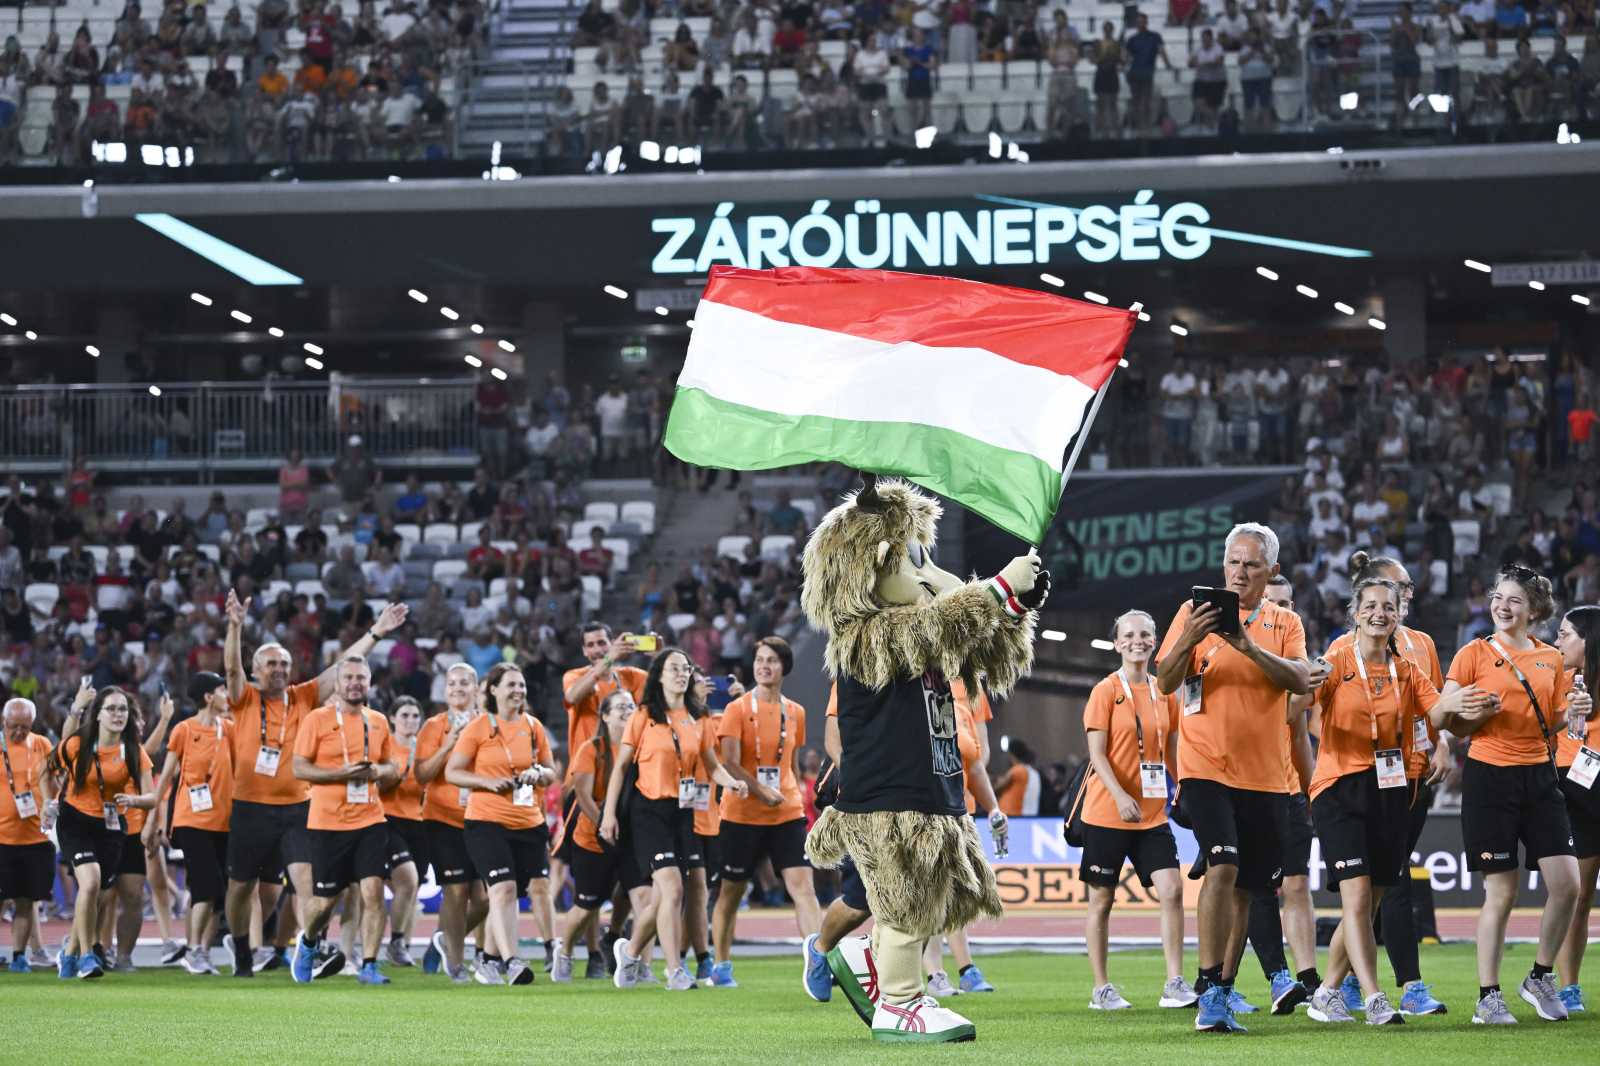 Balázs Fürjes described the IAAF World Cup in Budapest as a global success for the team